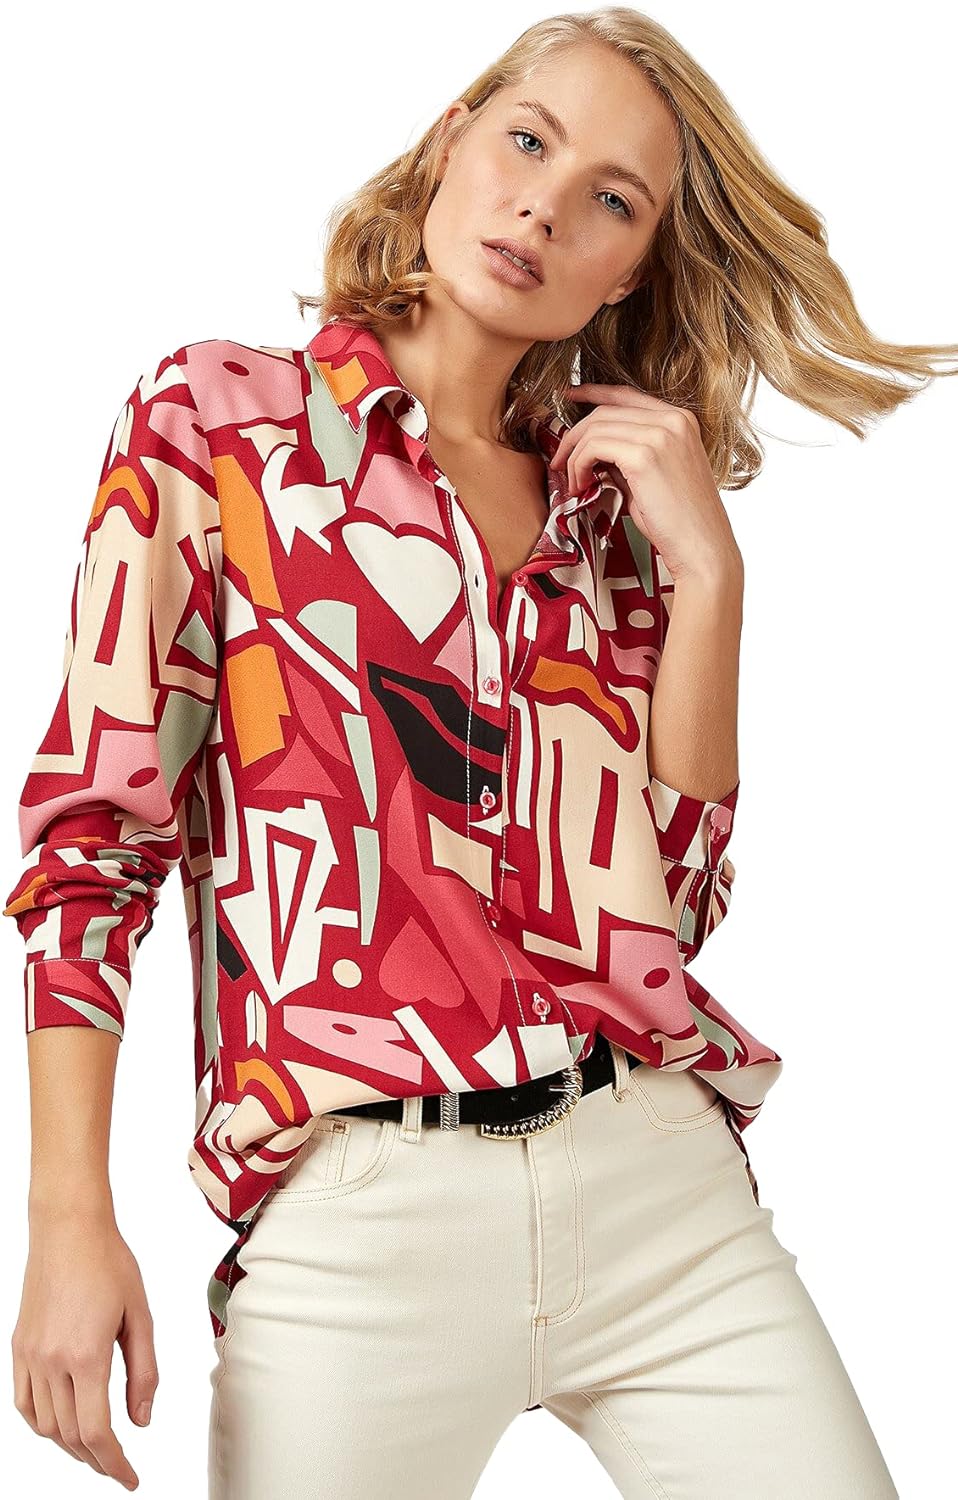 Blouses for Women Fashion, Long Sleeve Button Down Shirts Dressy Casual Tops